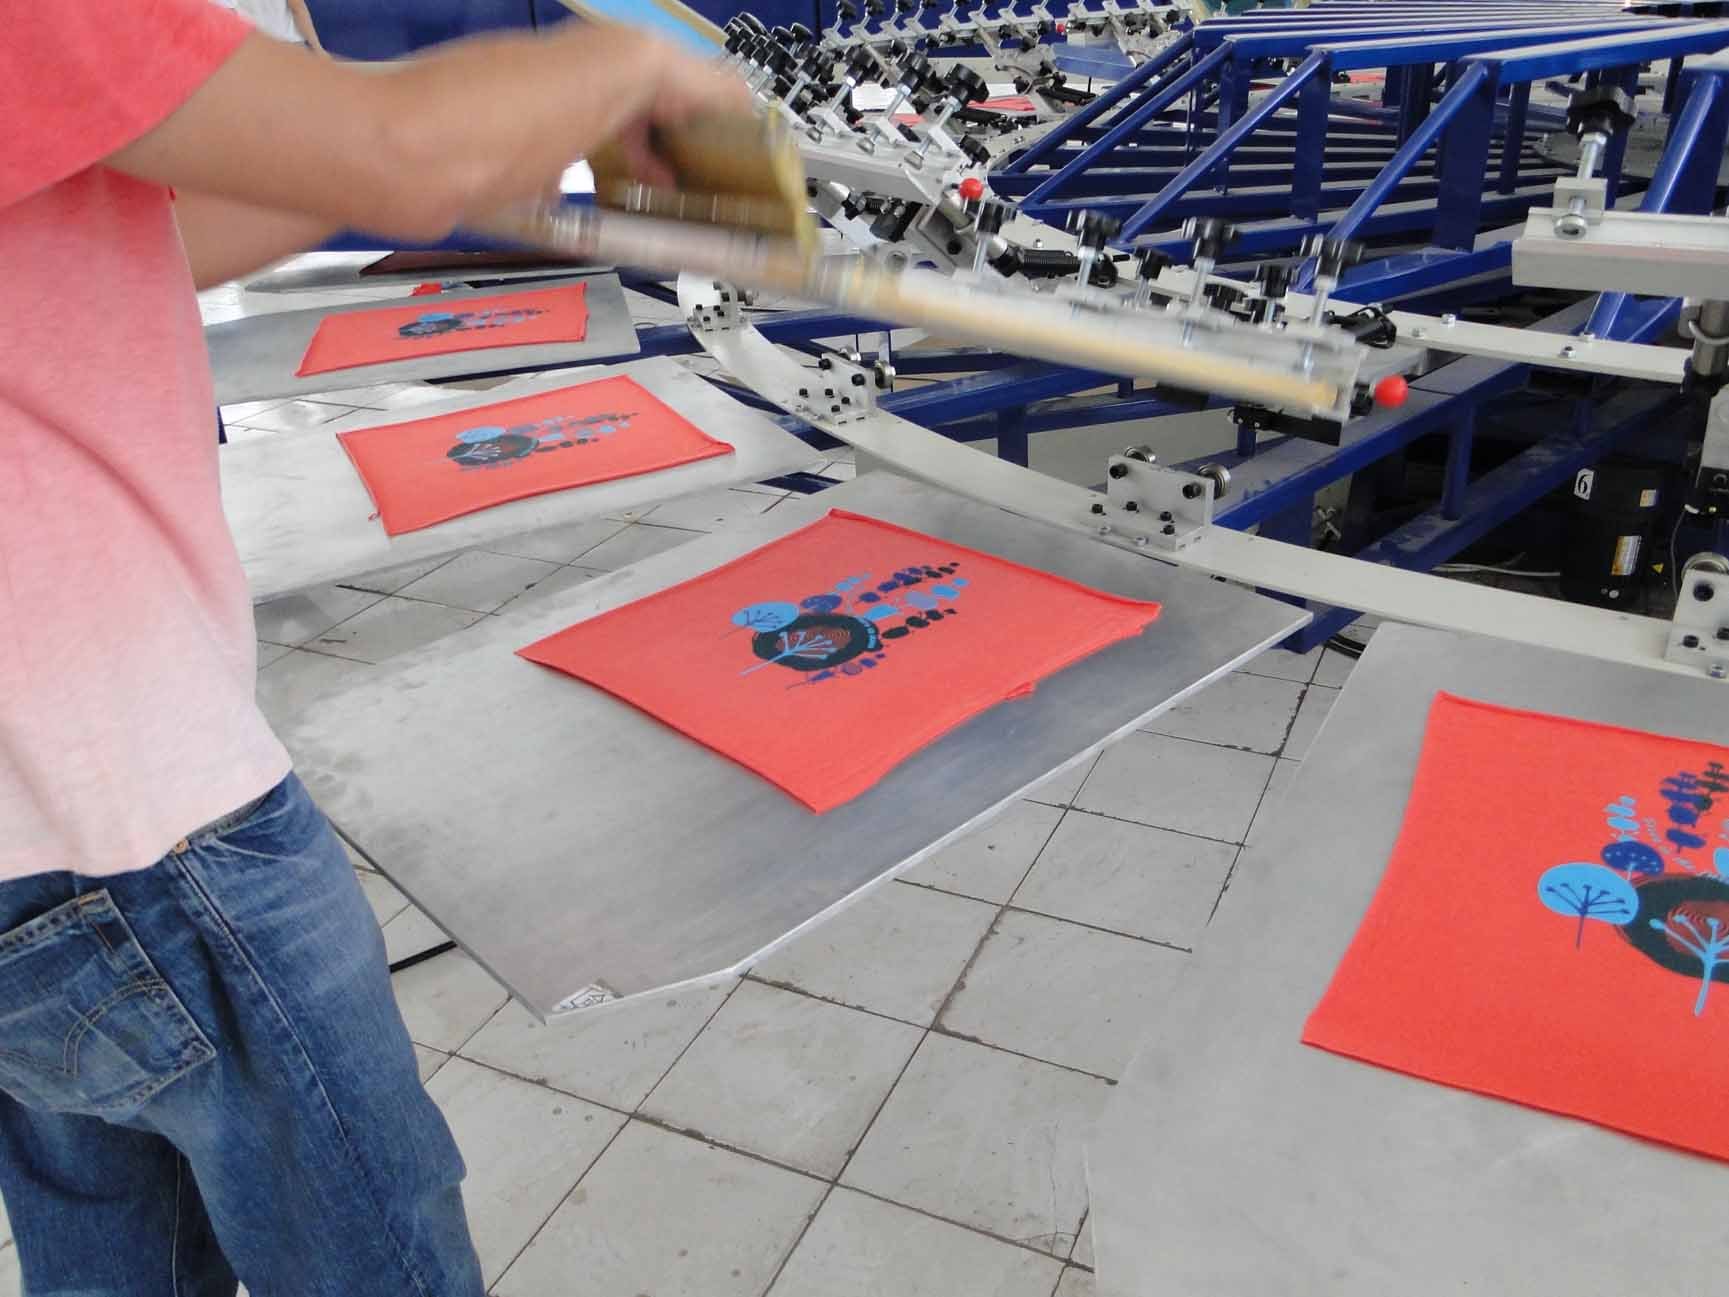 different types of t shirt printing machines